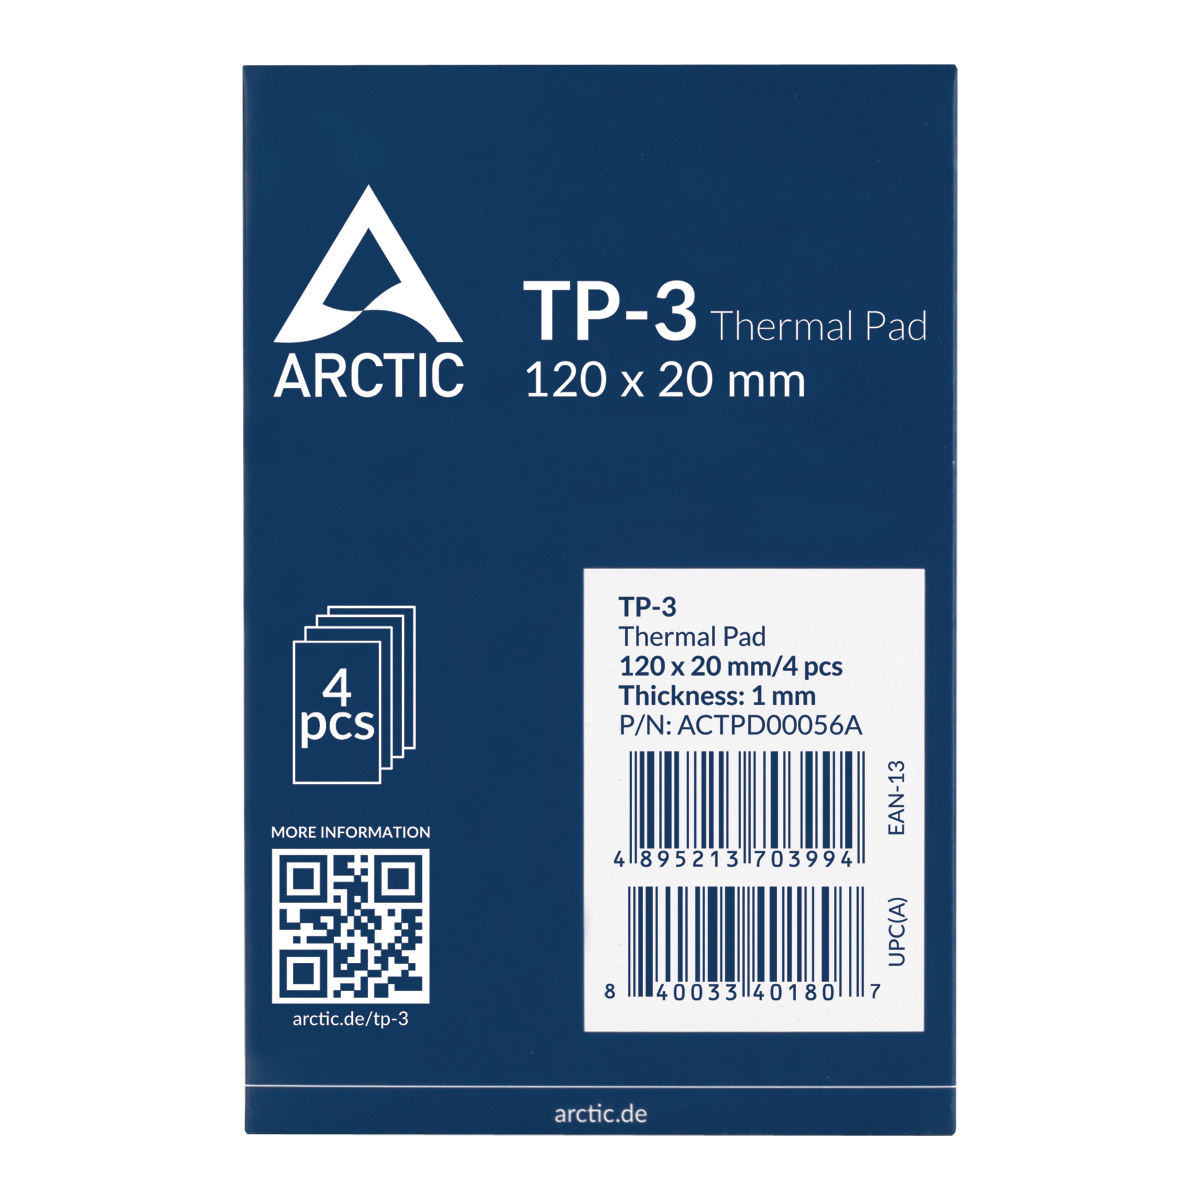 TP-3_120x20mm_1mm_Packaging